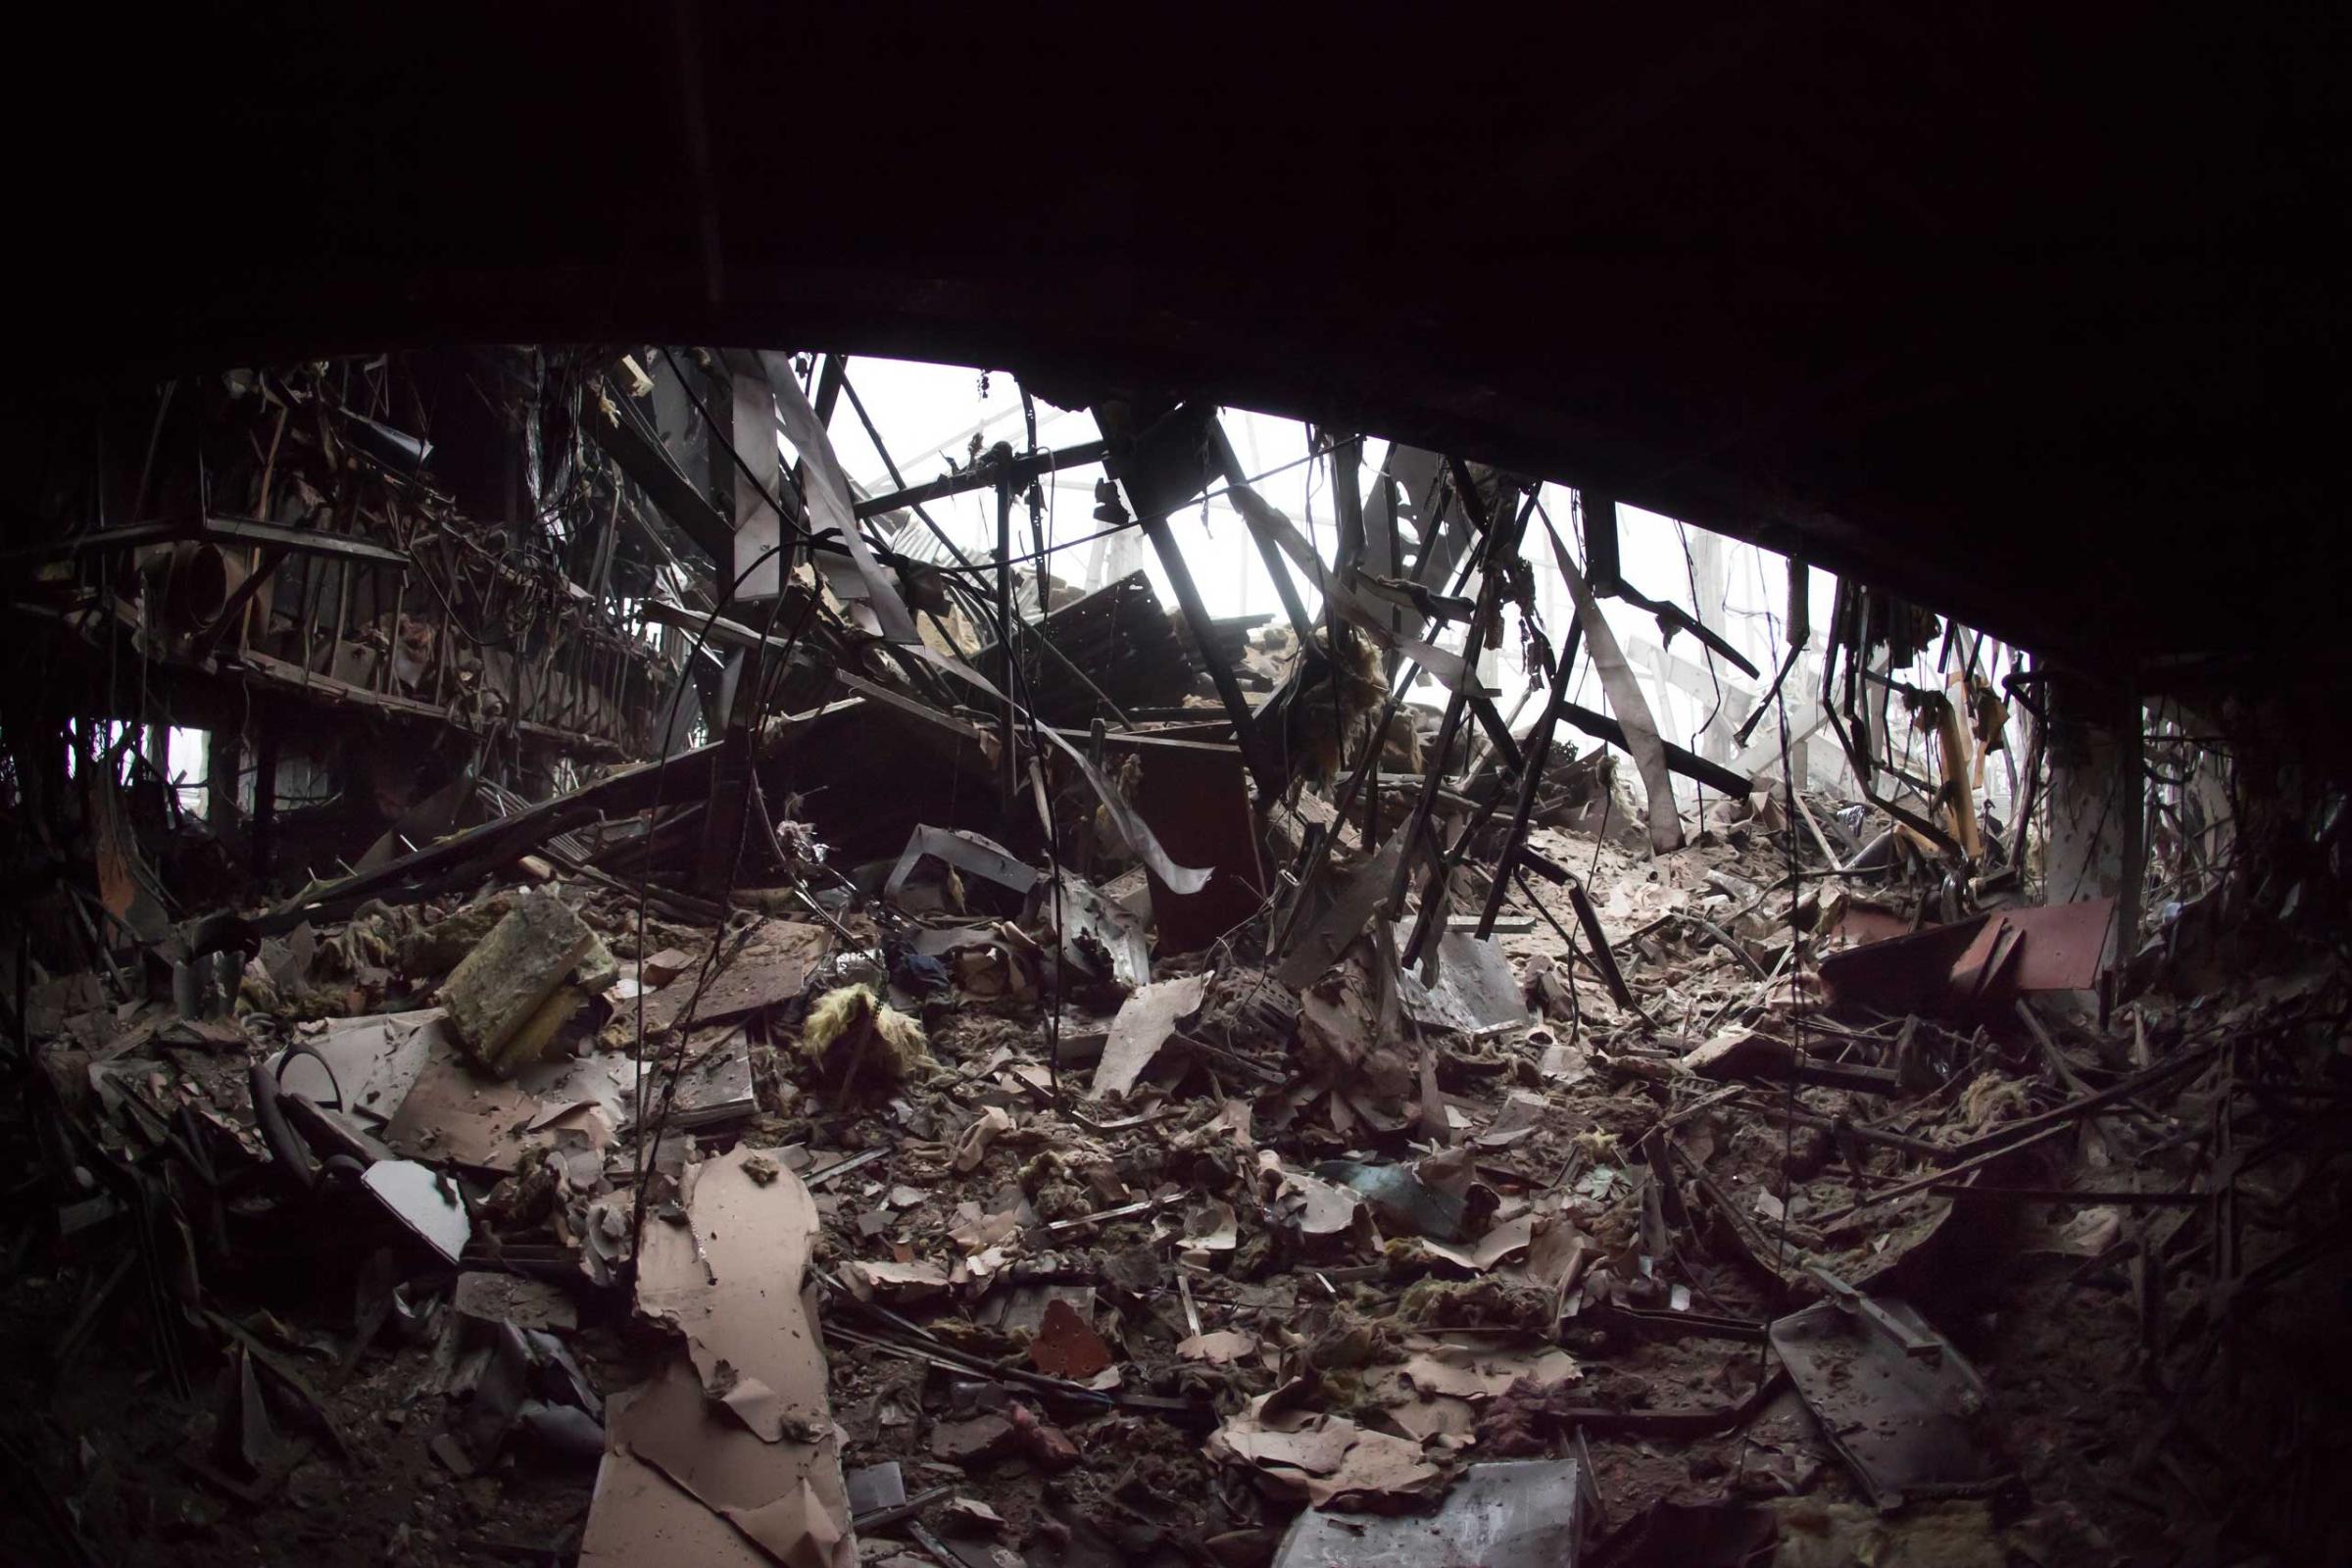 Inside the destroyed airport on Jan. 21, 2015.